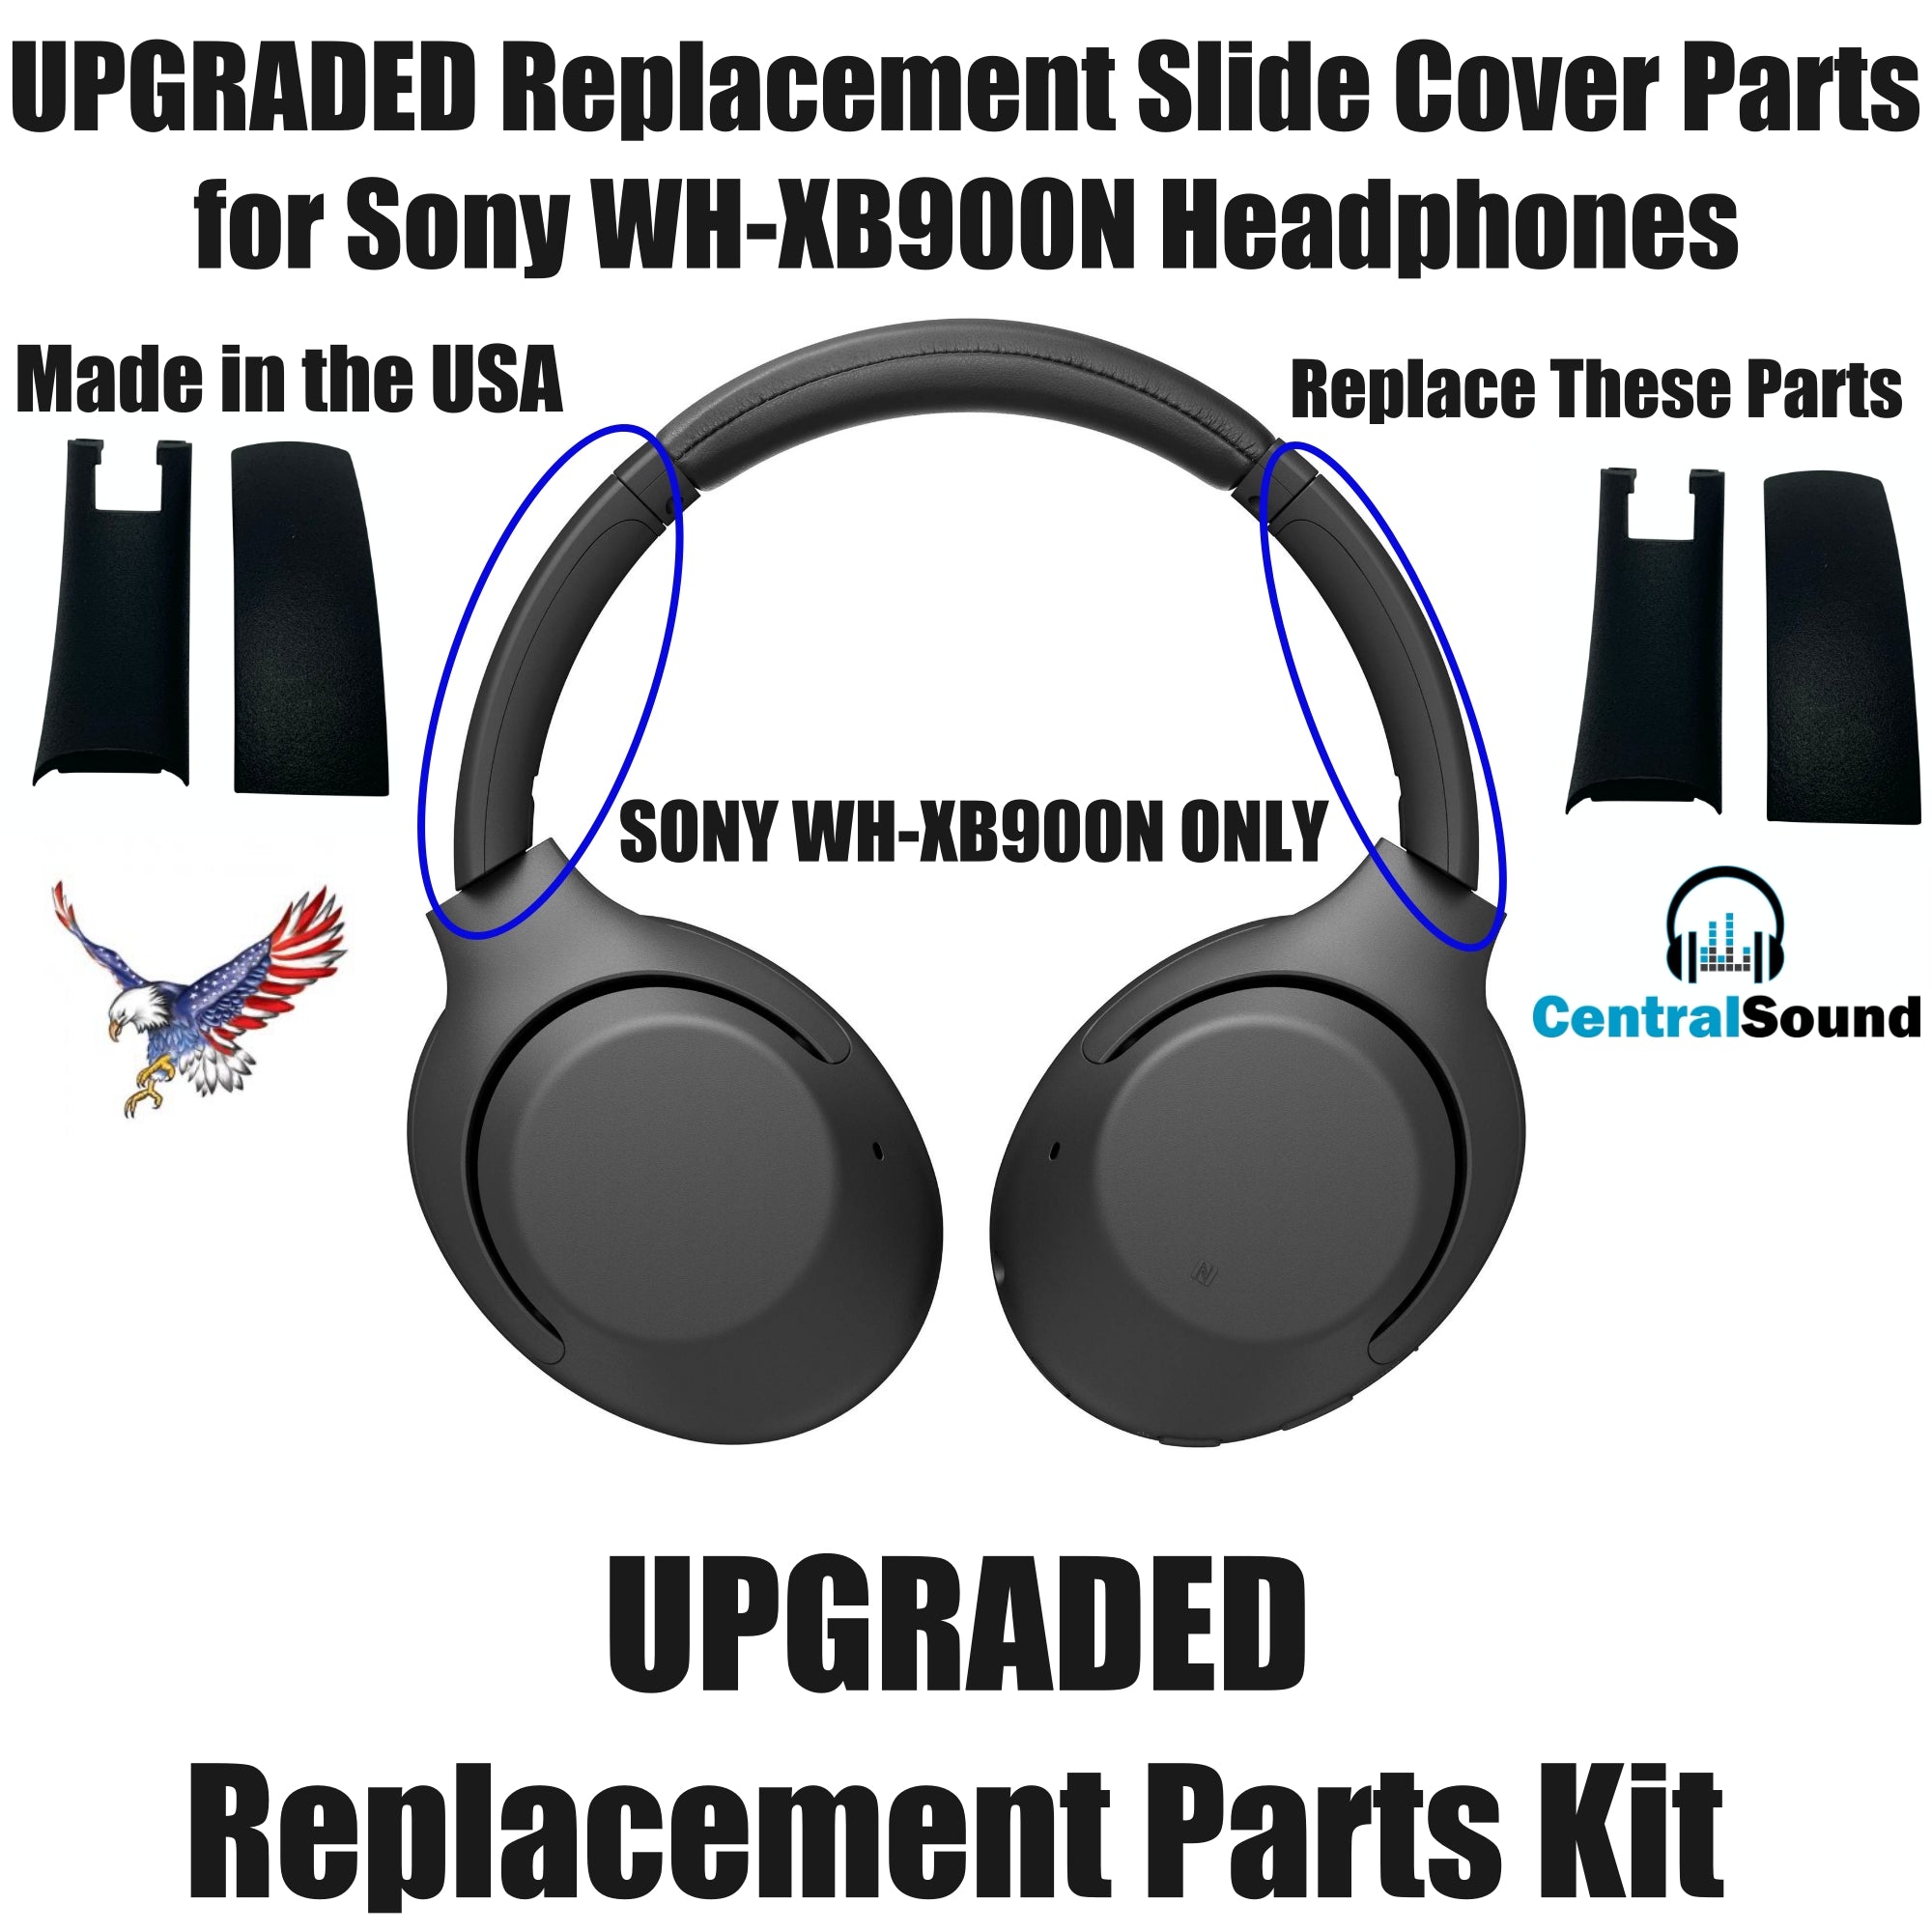 Replacement Side Cover Slider Parts UPGRADE KIT for Sony WH-XB900N WHX